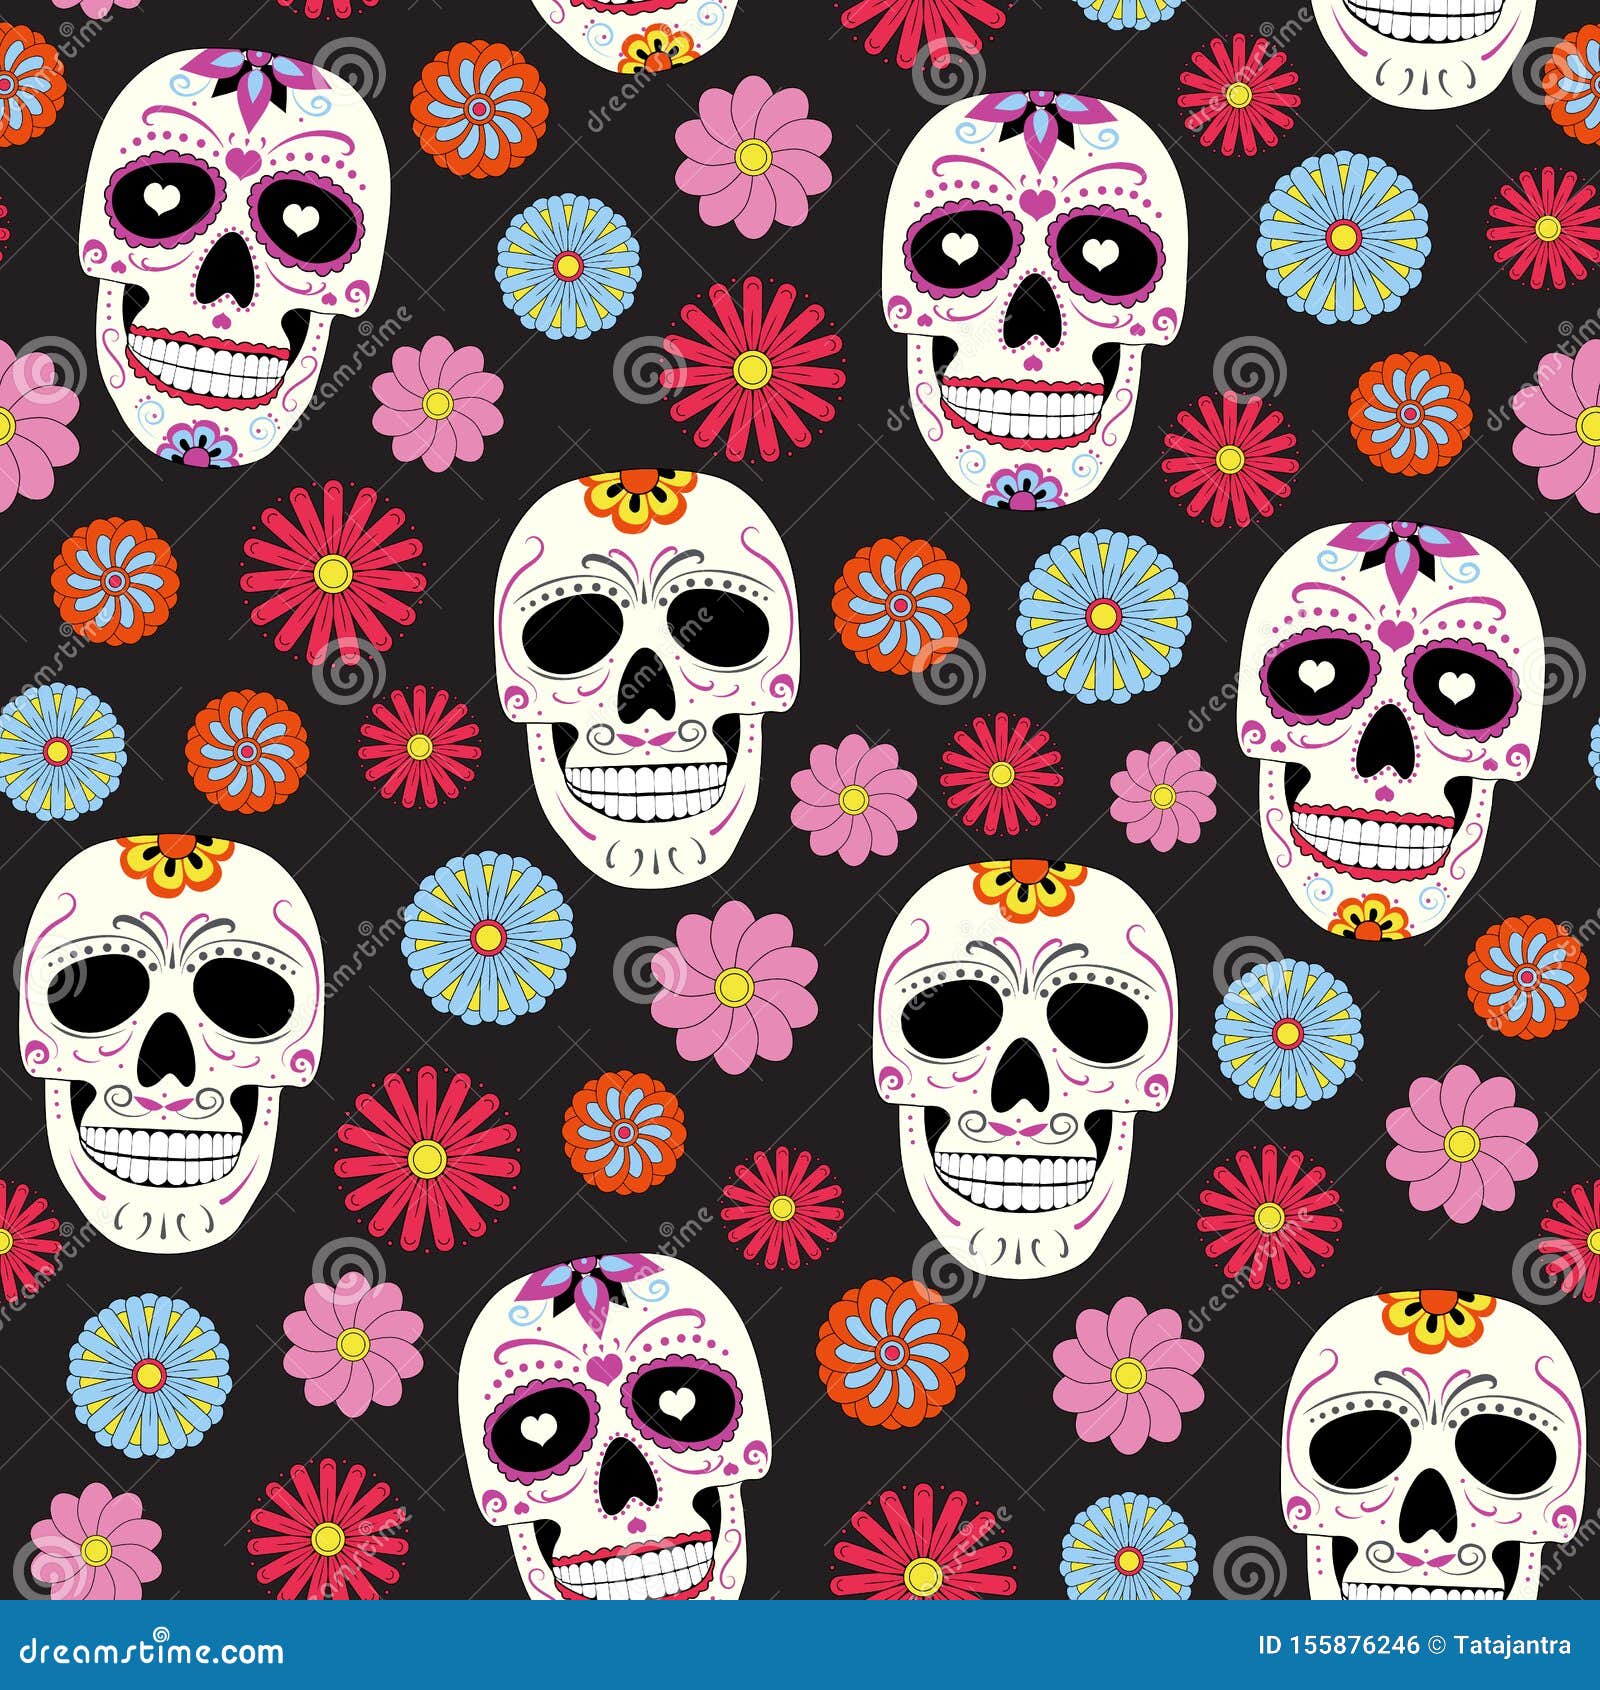 Sugar Skull 7x5 FT Vinyl Photography Background Backdrops,Pattern With Skulls and Red Roses in Floral Mexican Style Ornaments Print Background for Graduation Prom Dance Decor Photo Booth Studio Prop B